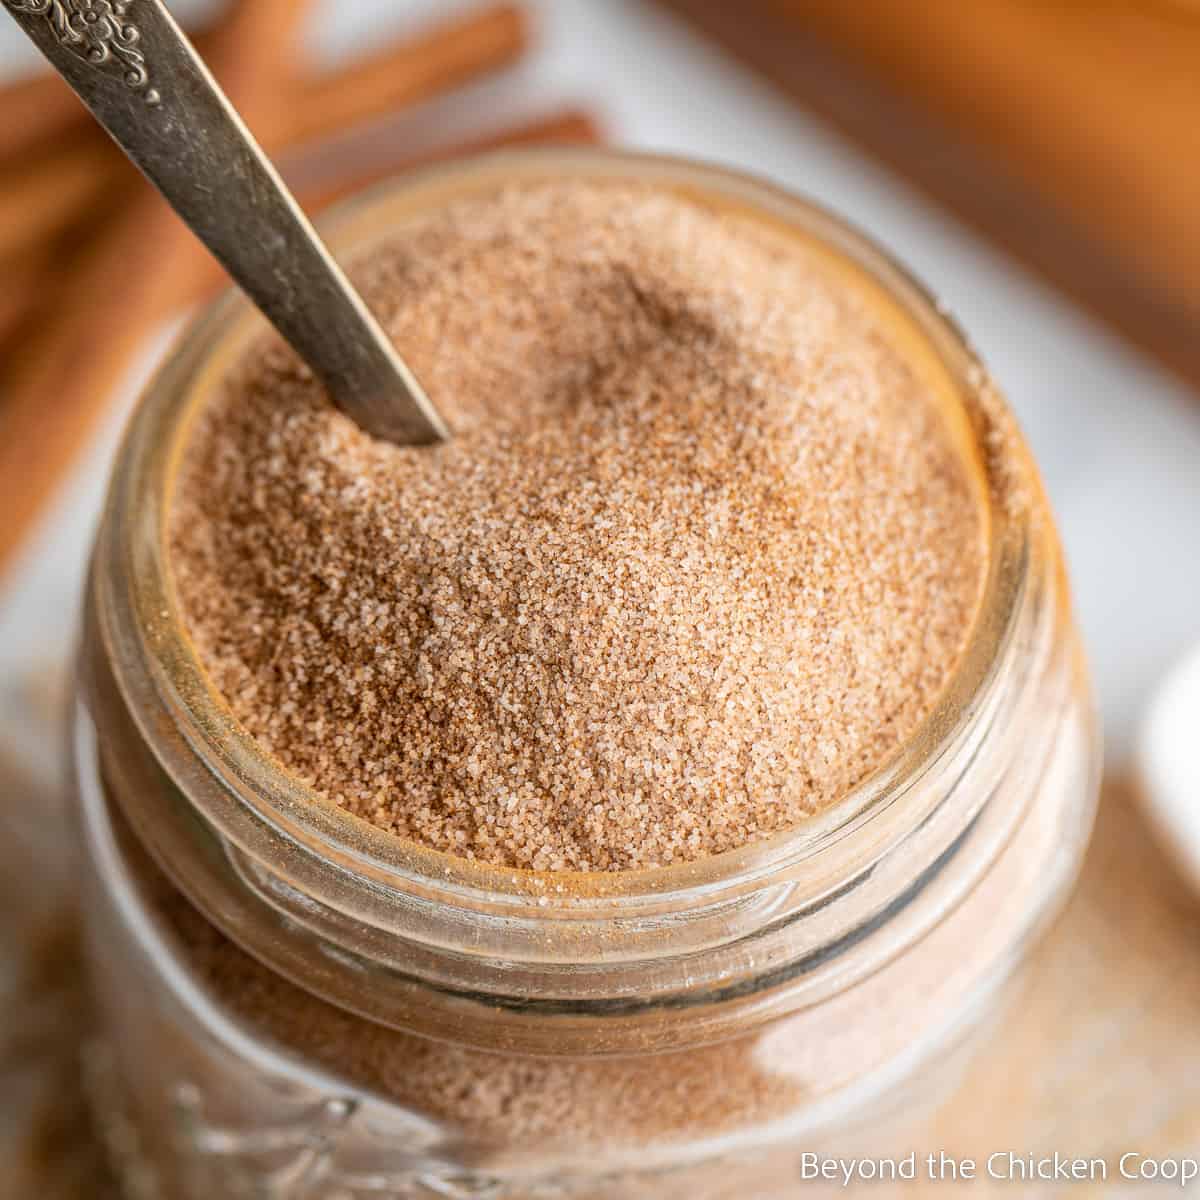 Cinnamon and sugar mixed together in a canning jar.